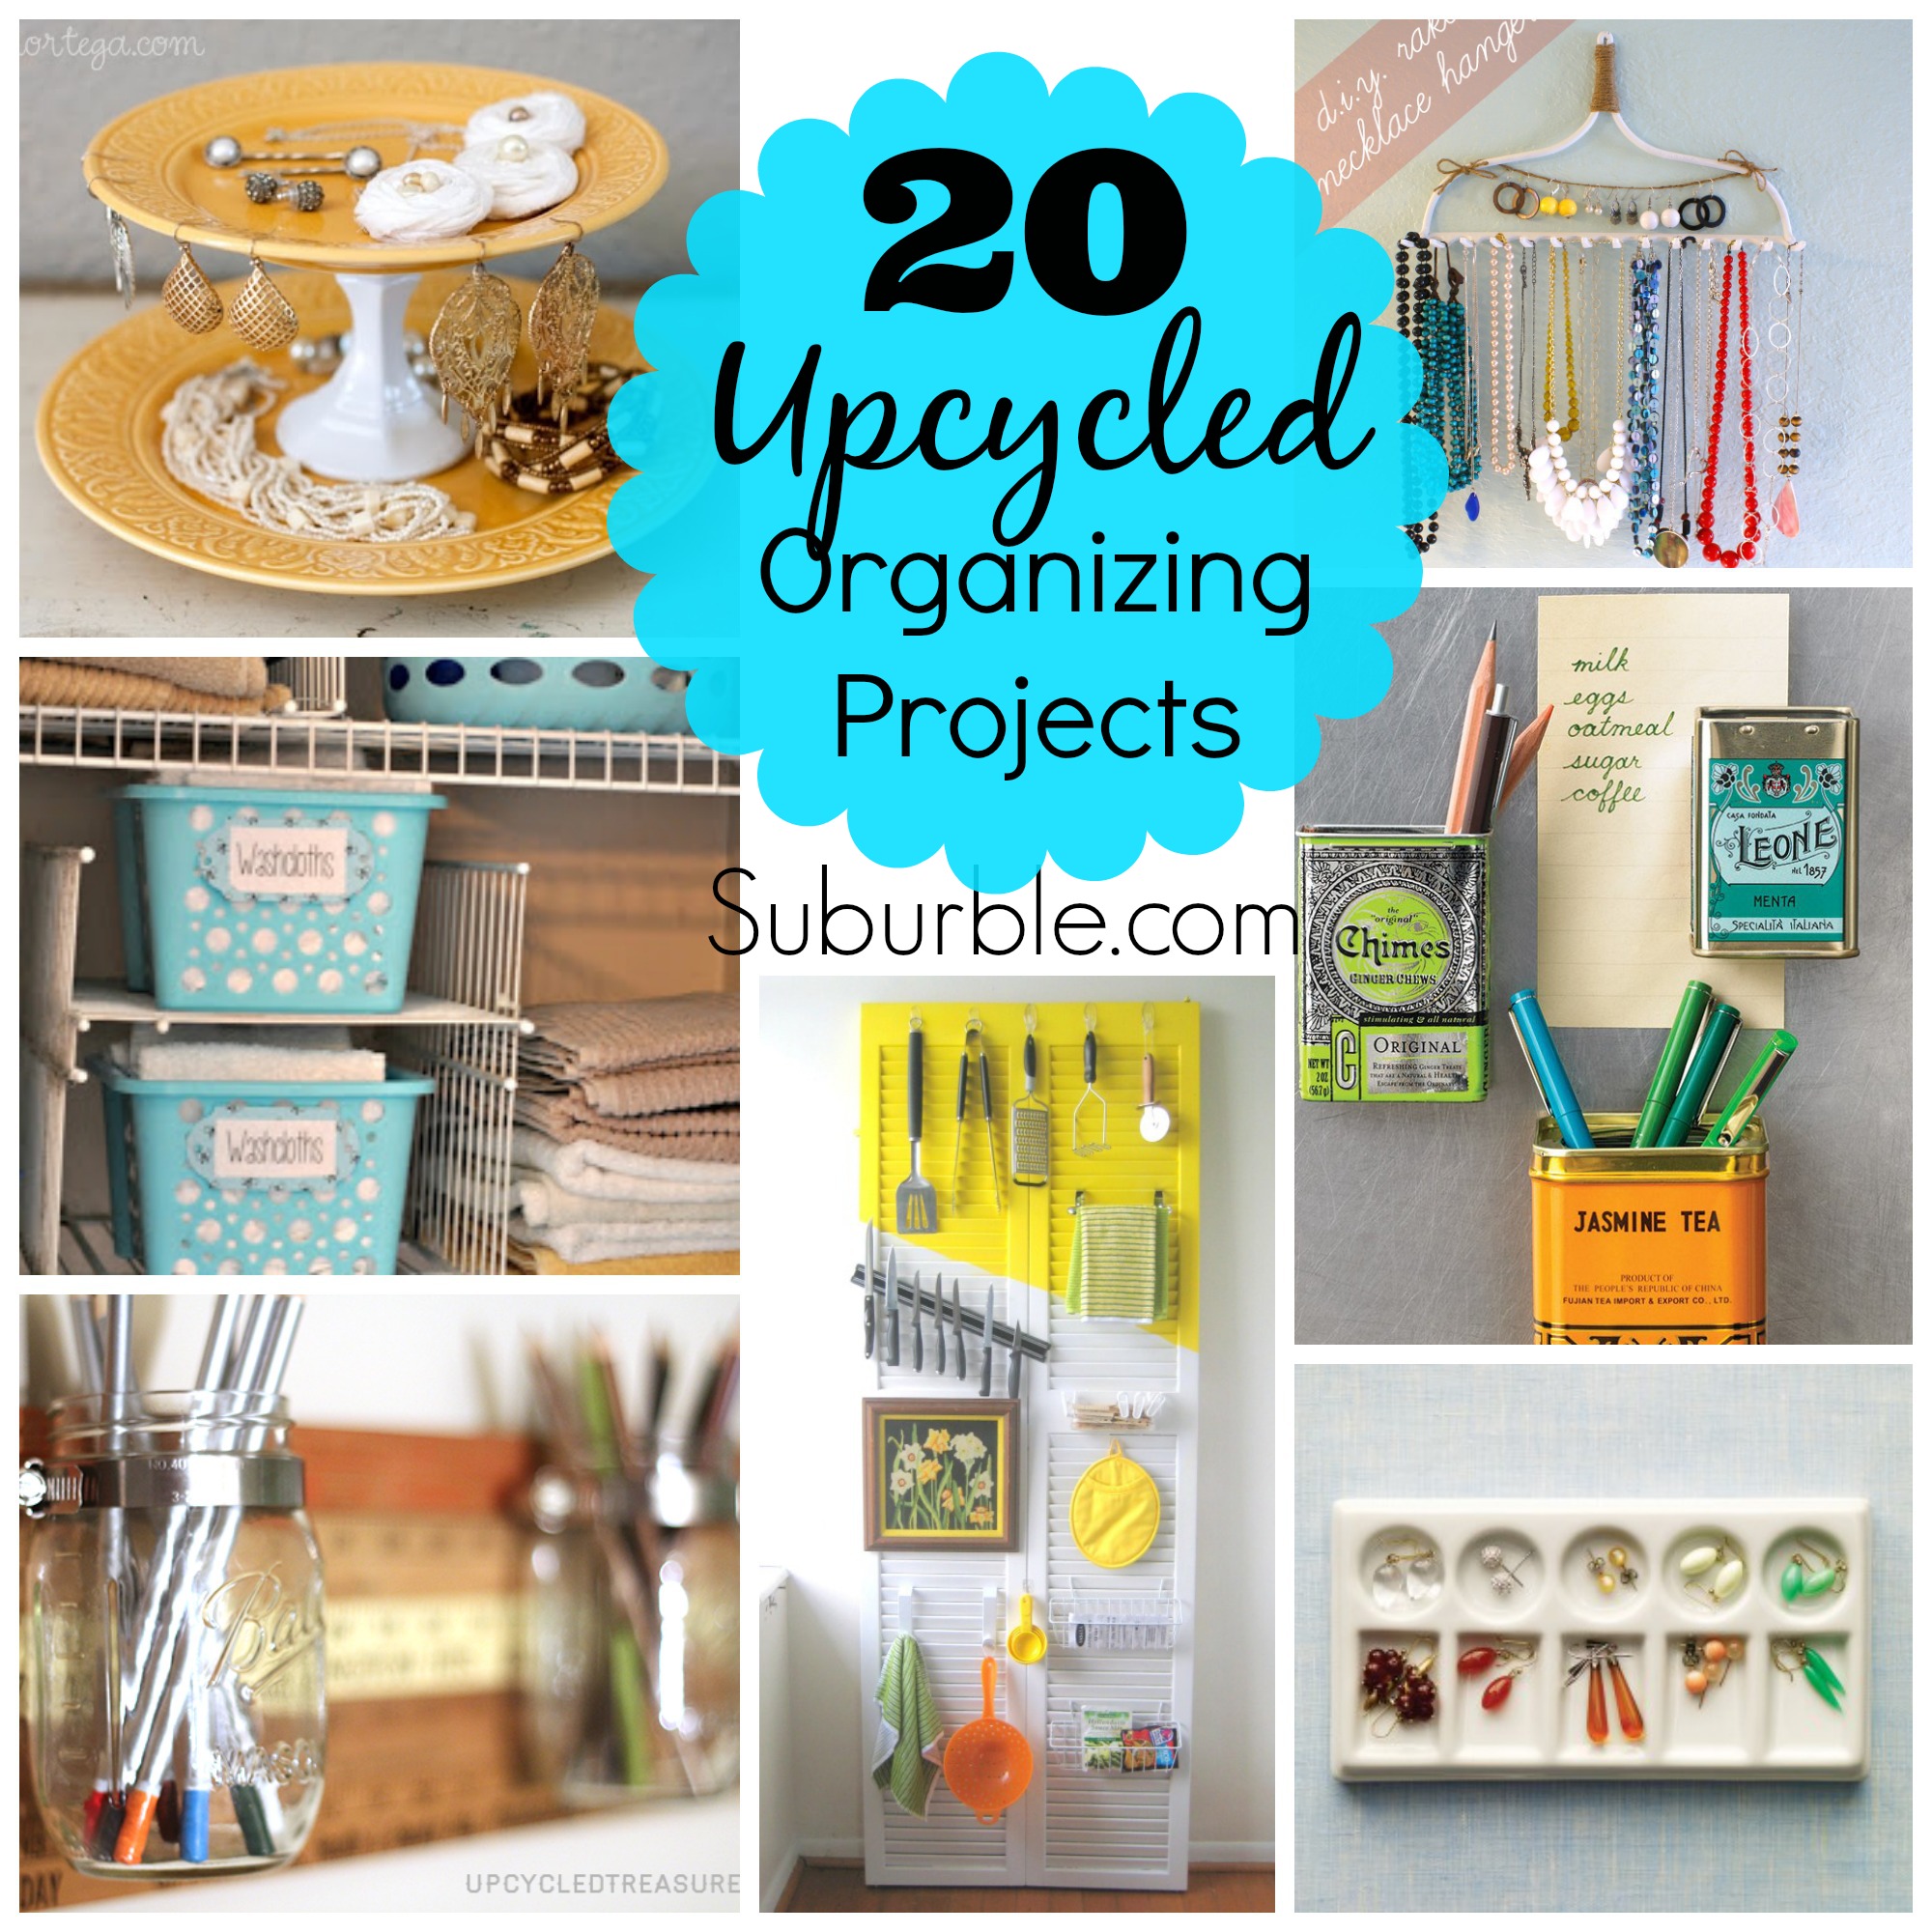 20 Awesome Upcycled Organizing Projects - Suburble